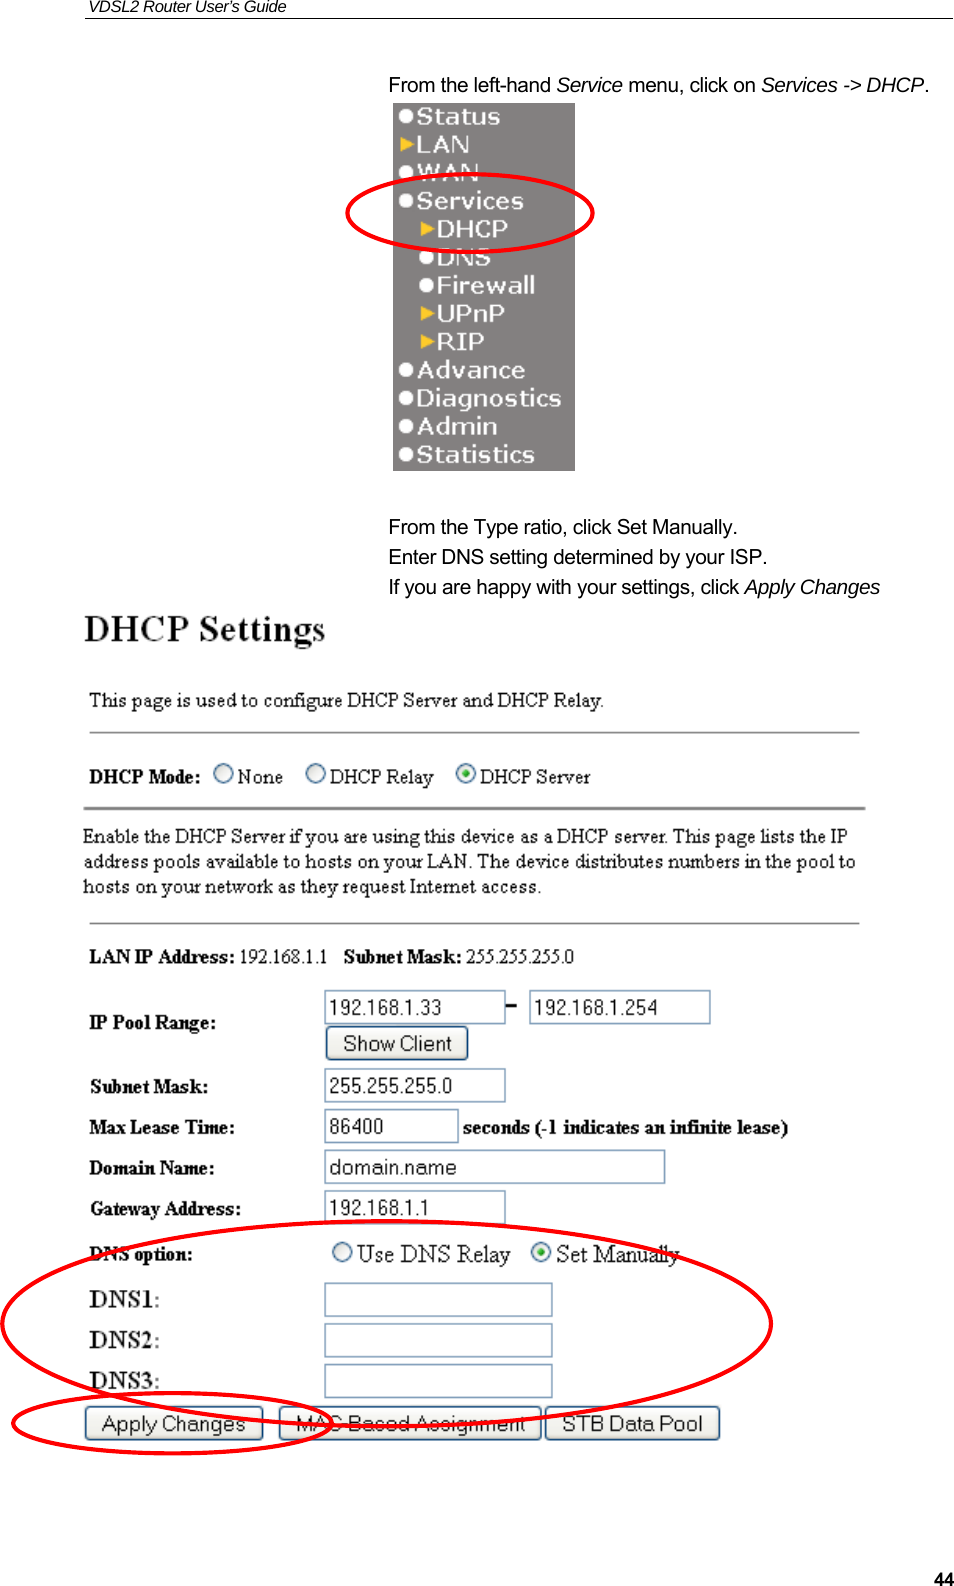 VDSL2 Router User’s Guide     44From the left-hand Service menu, click on Services -&gt; DHCP.    From the Type ratio, click Set Manually. Enter DNS setting determined by your ISP. If you are happy with your settings, click Apply Changes    